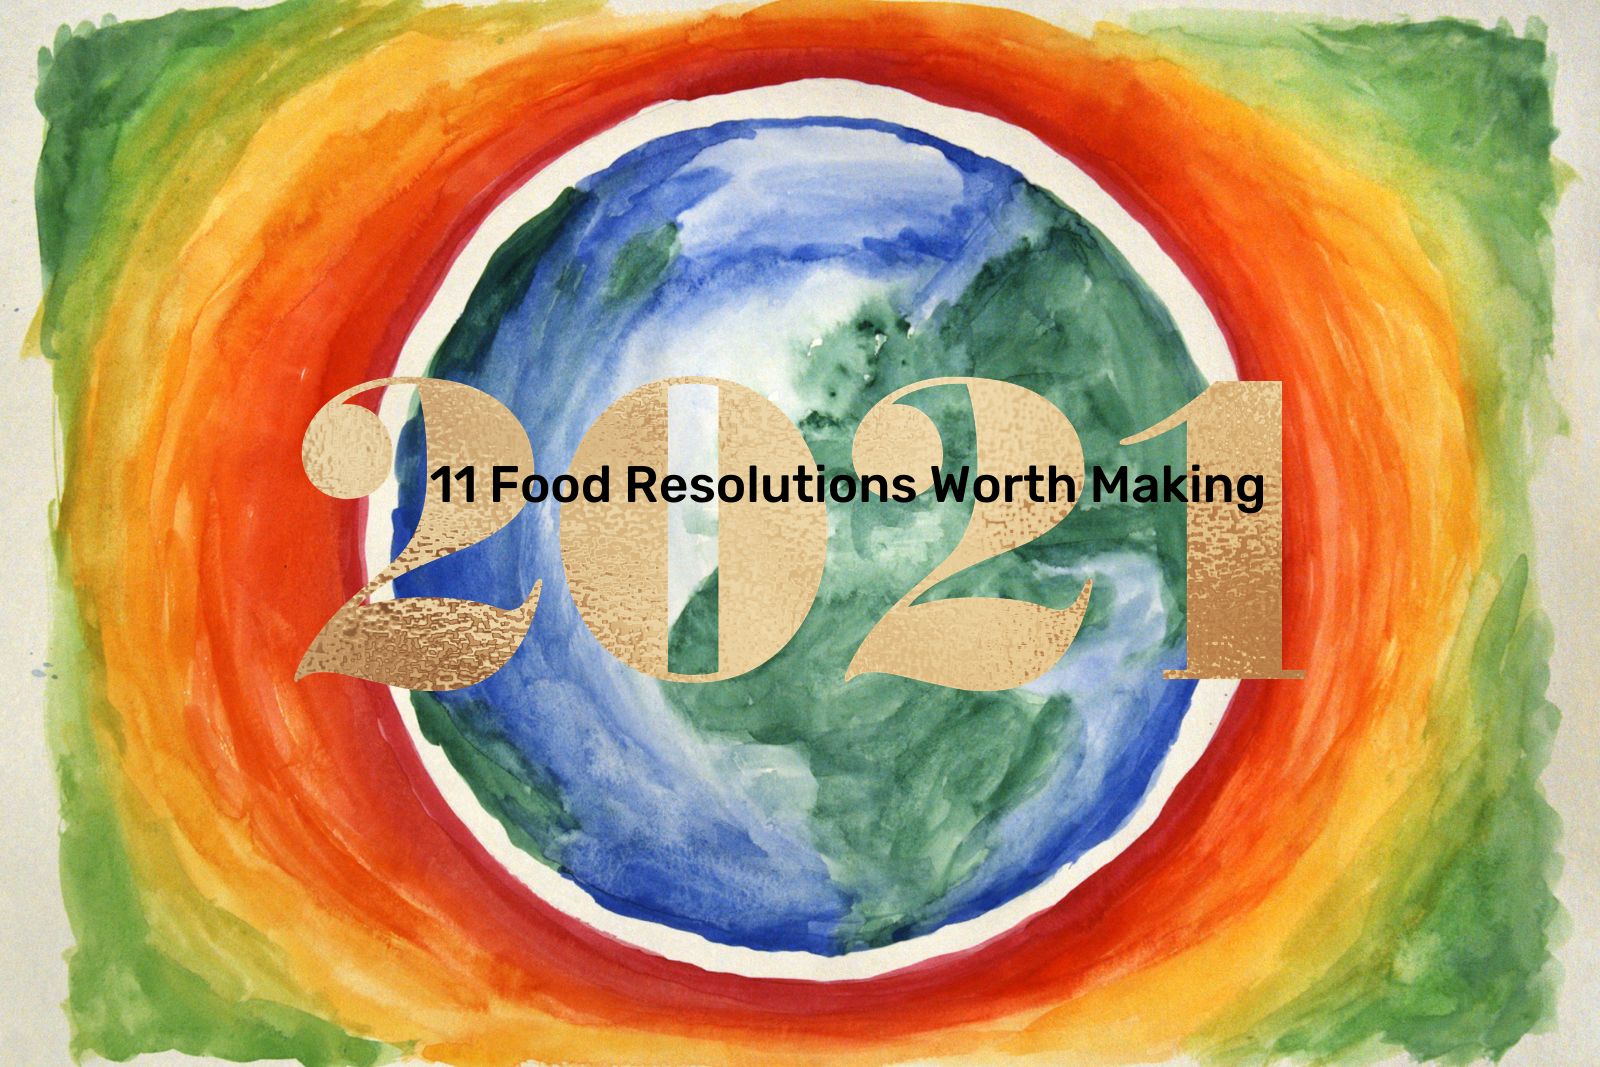 11 Food Resolutions for 2021